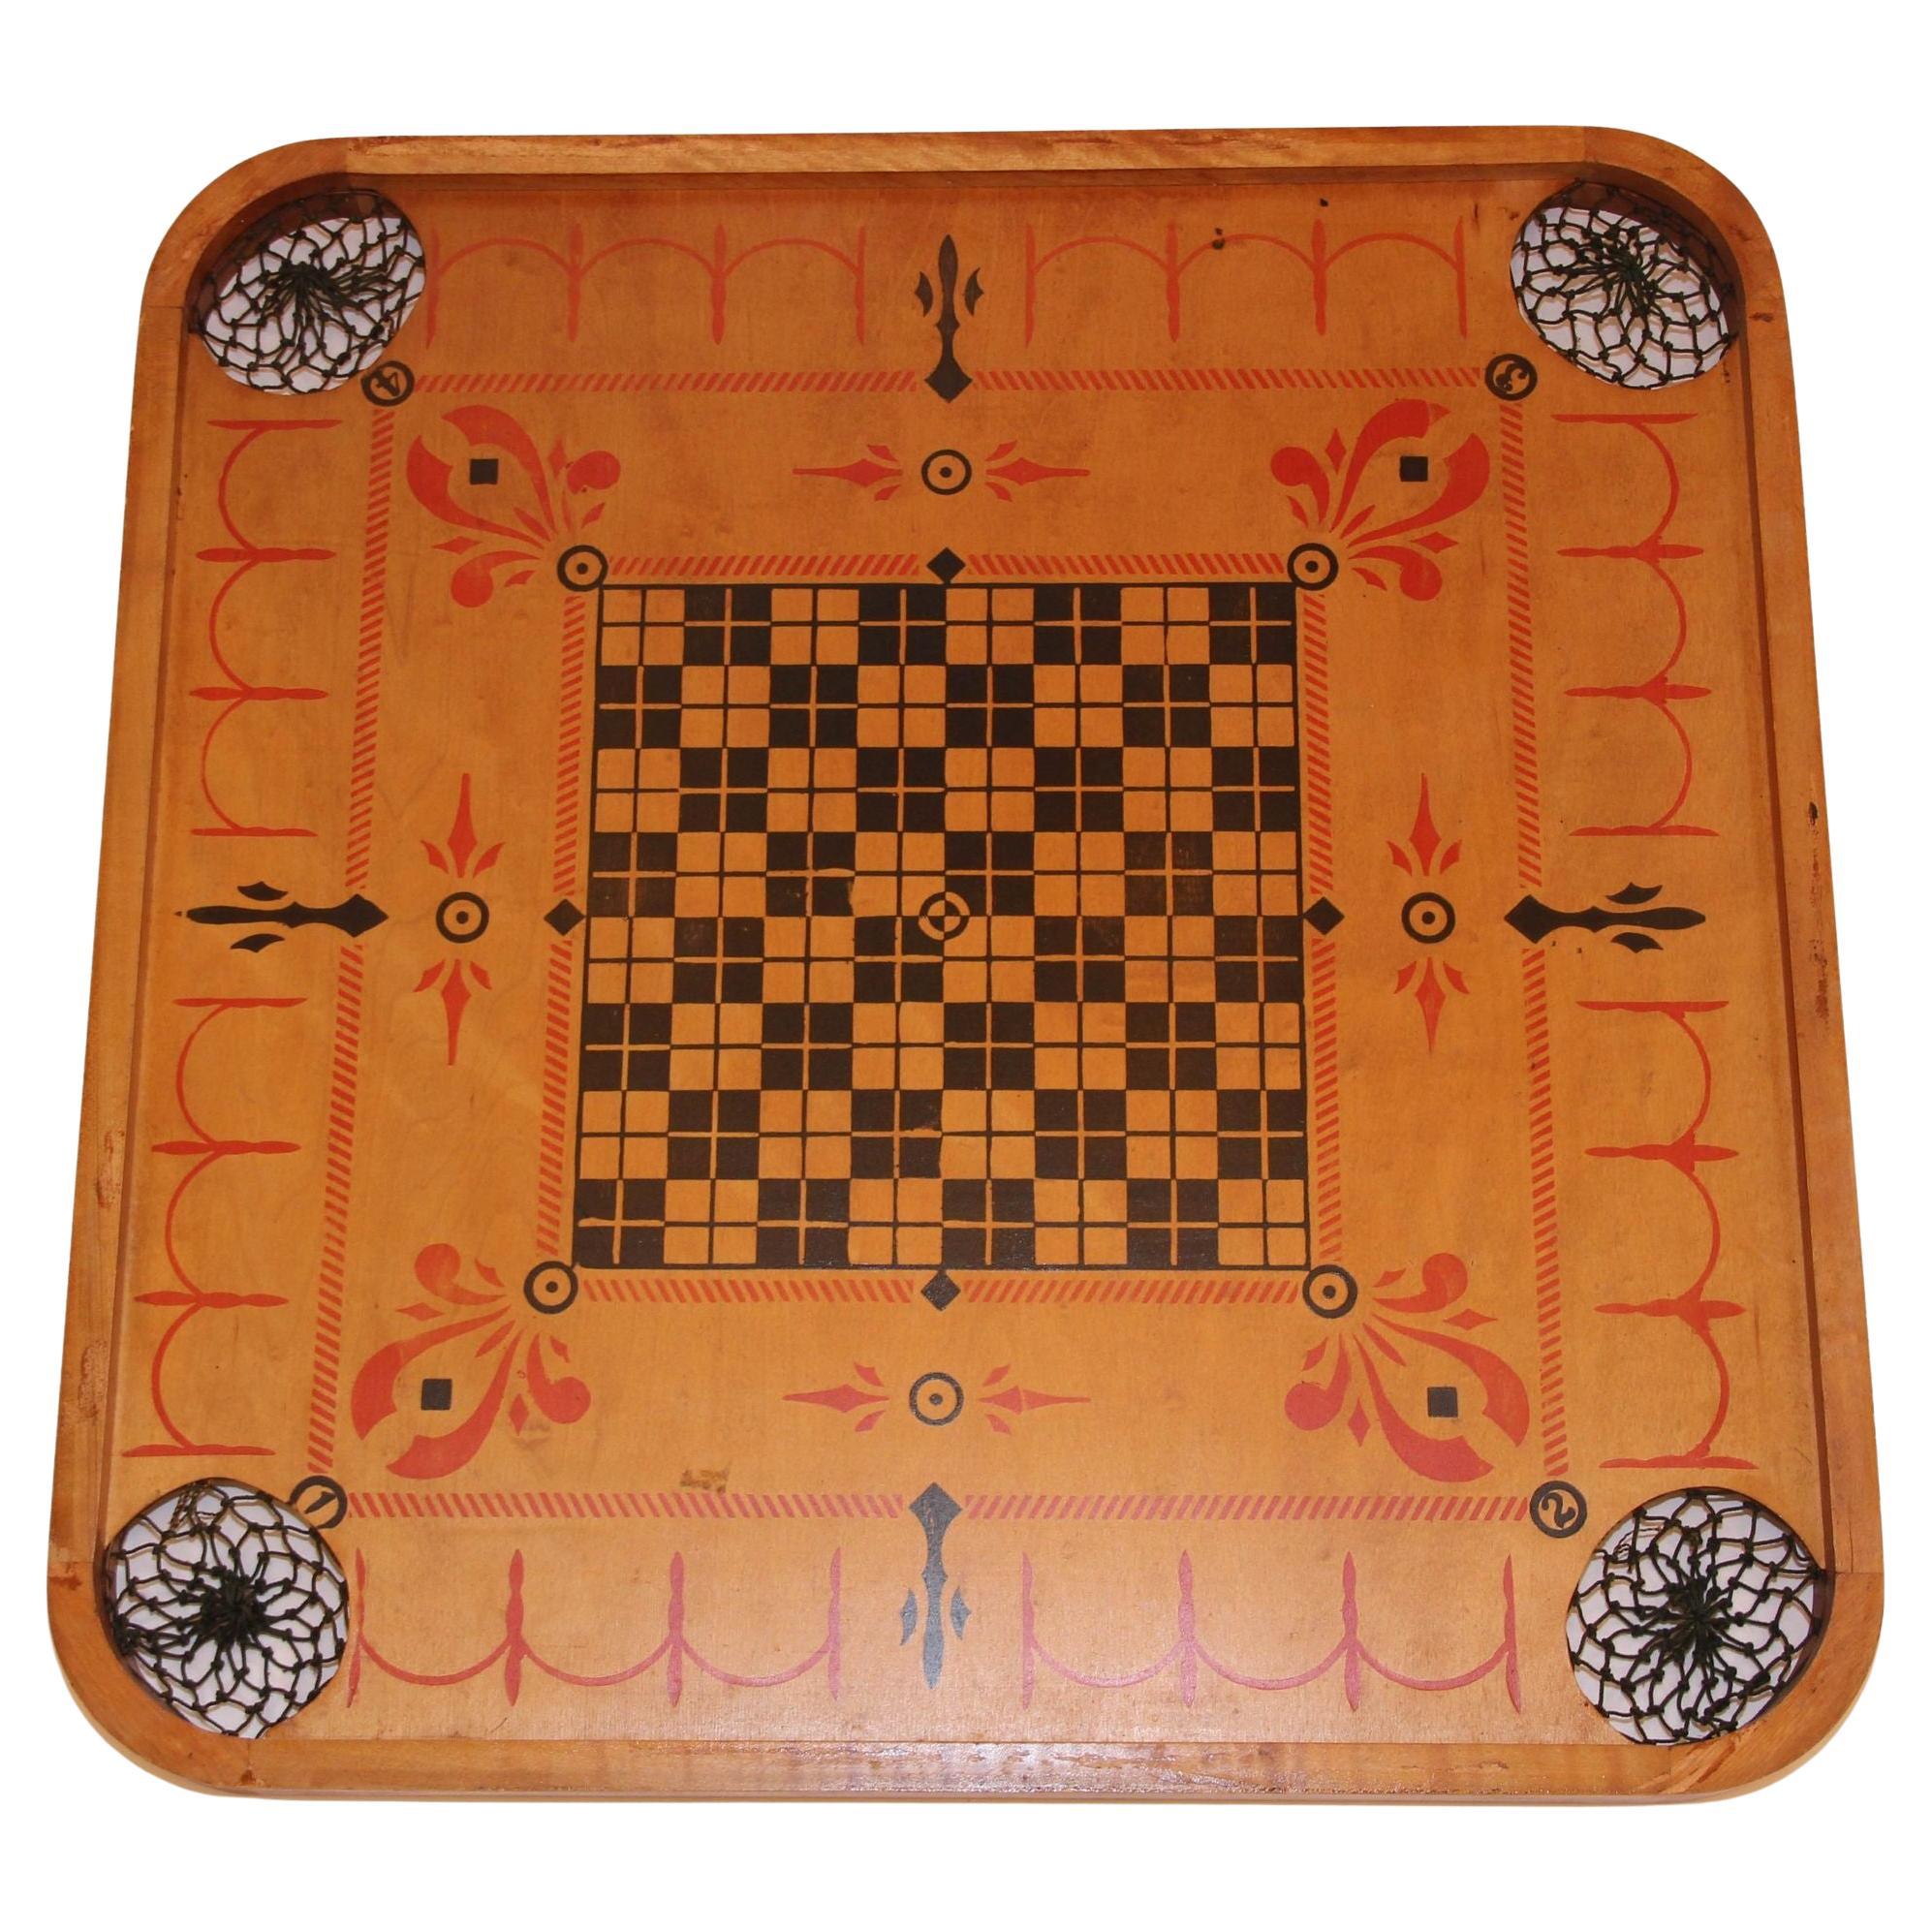 What is a carrom game board?